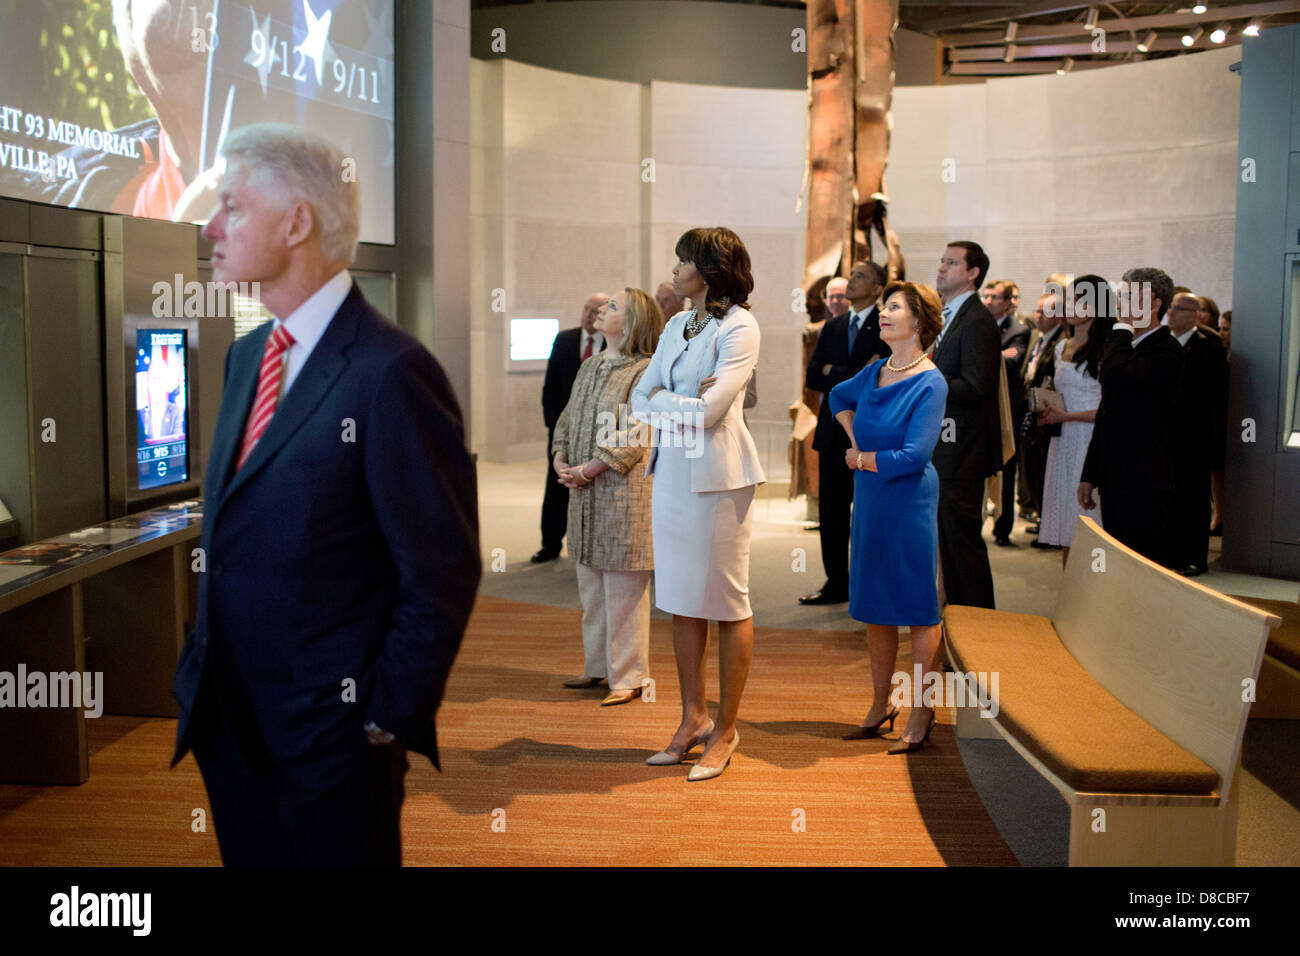 US First Lady Michelle Obama along with former First Ladies Laura Bush and Hillary Rodham Clinton look at a 9/11 exhibit while touring the George W. Bush Presidential Library and Museum on the campus of Southern Methodist University April 25, 2013 in Dallas, Texas. Former President Bill Clinton is seen in the foreground. Stock Photo